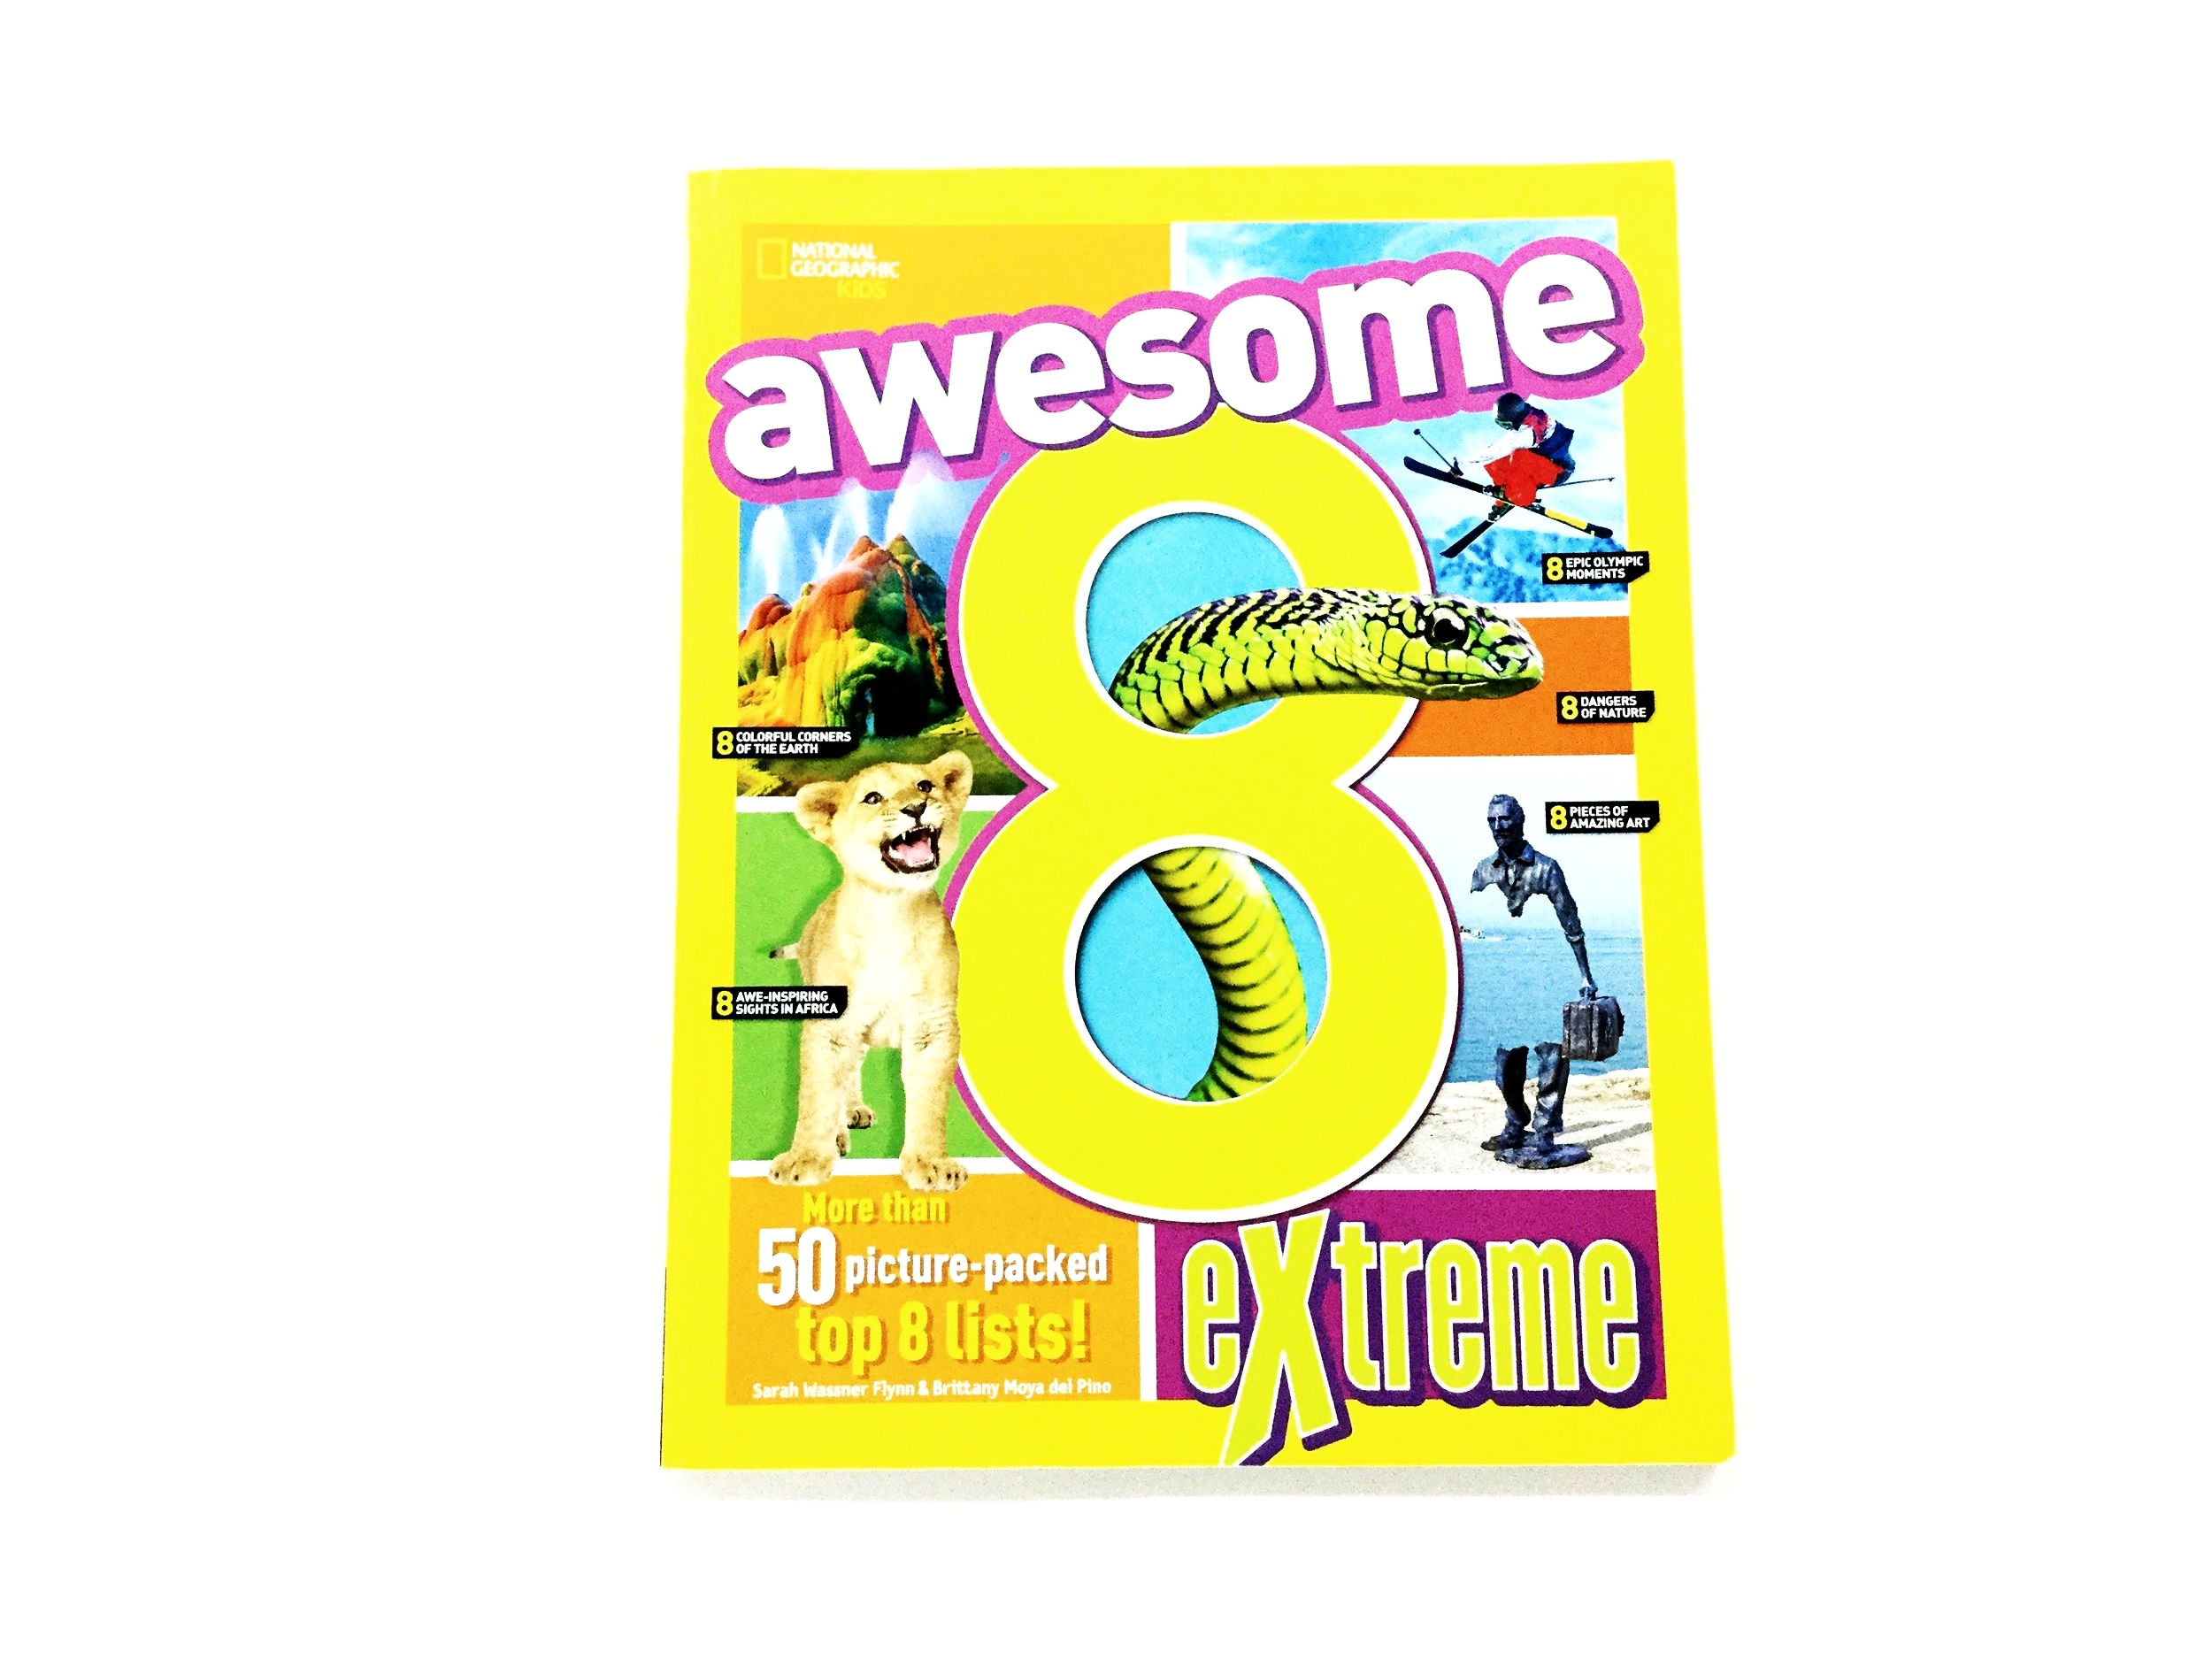 National Geographic Kids - Awesome 8 Extreme (Apr 2017 Cover)